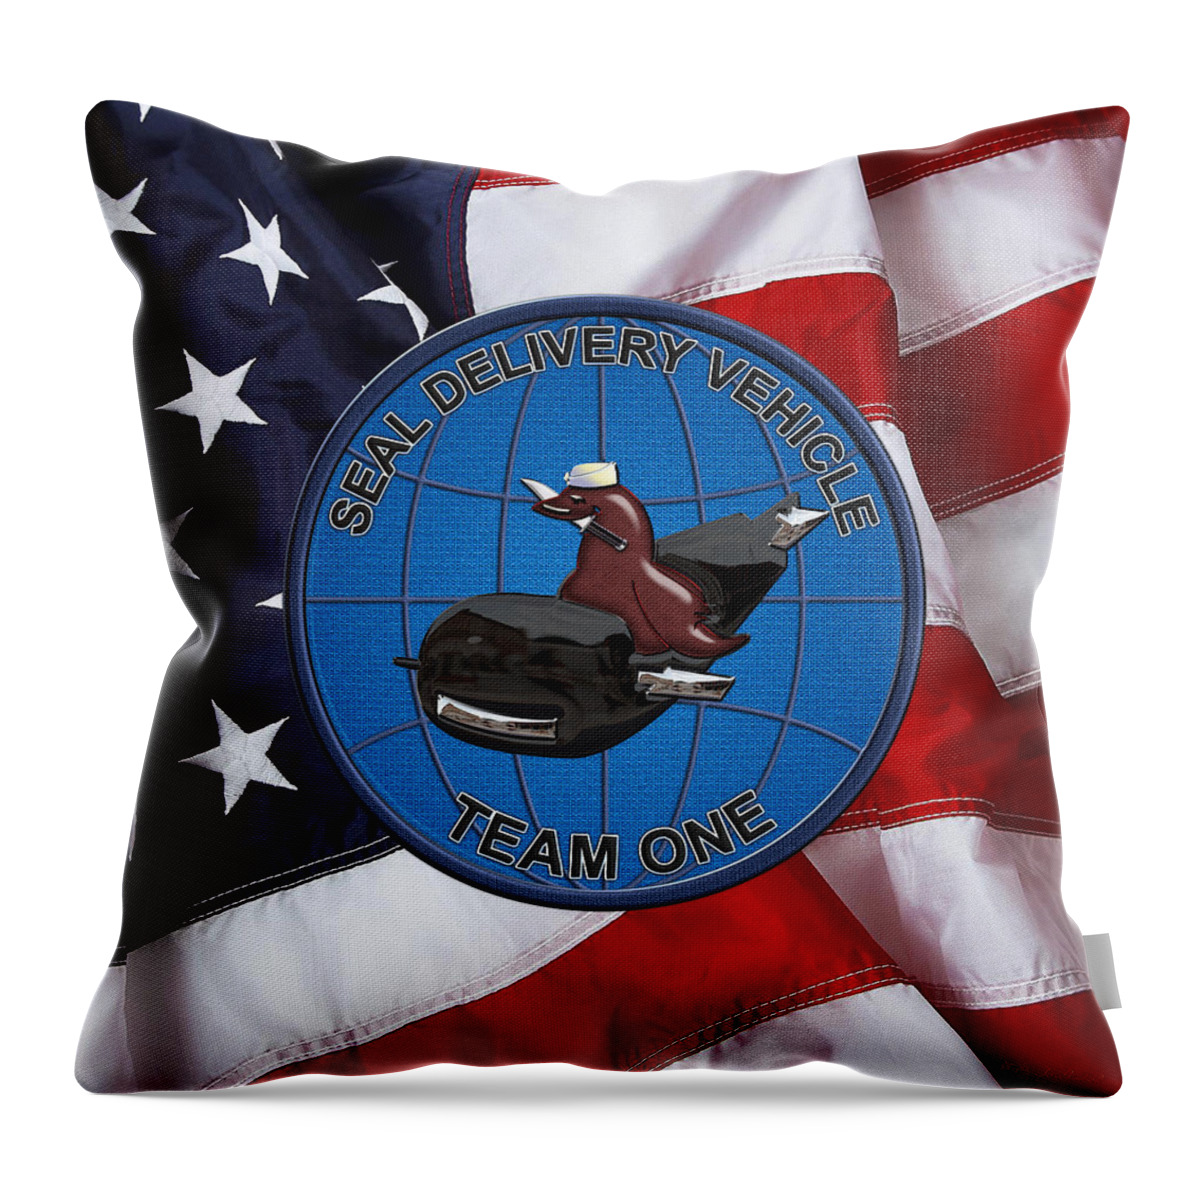 'military Insignia & Heraldry - Nswc' Collection By Serge Averbukh Throw Pillow featuring the digital art S E A L Delivery Vehicle Team One - S D V T 1 Patch over U. S. Flag by Serge Averbukh